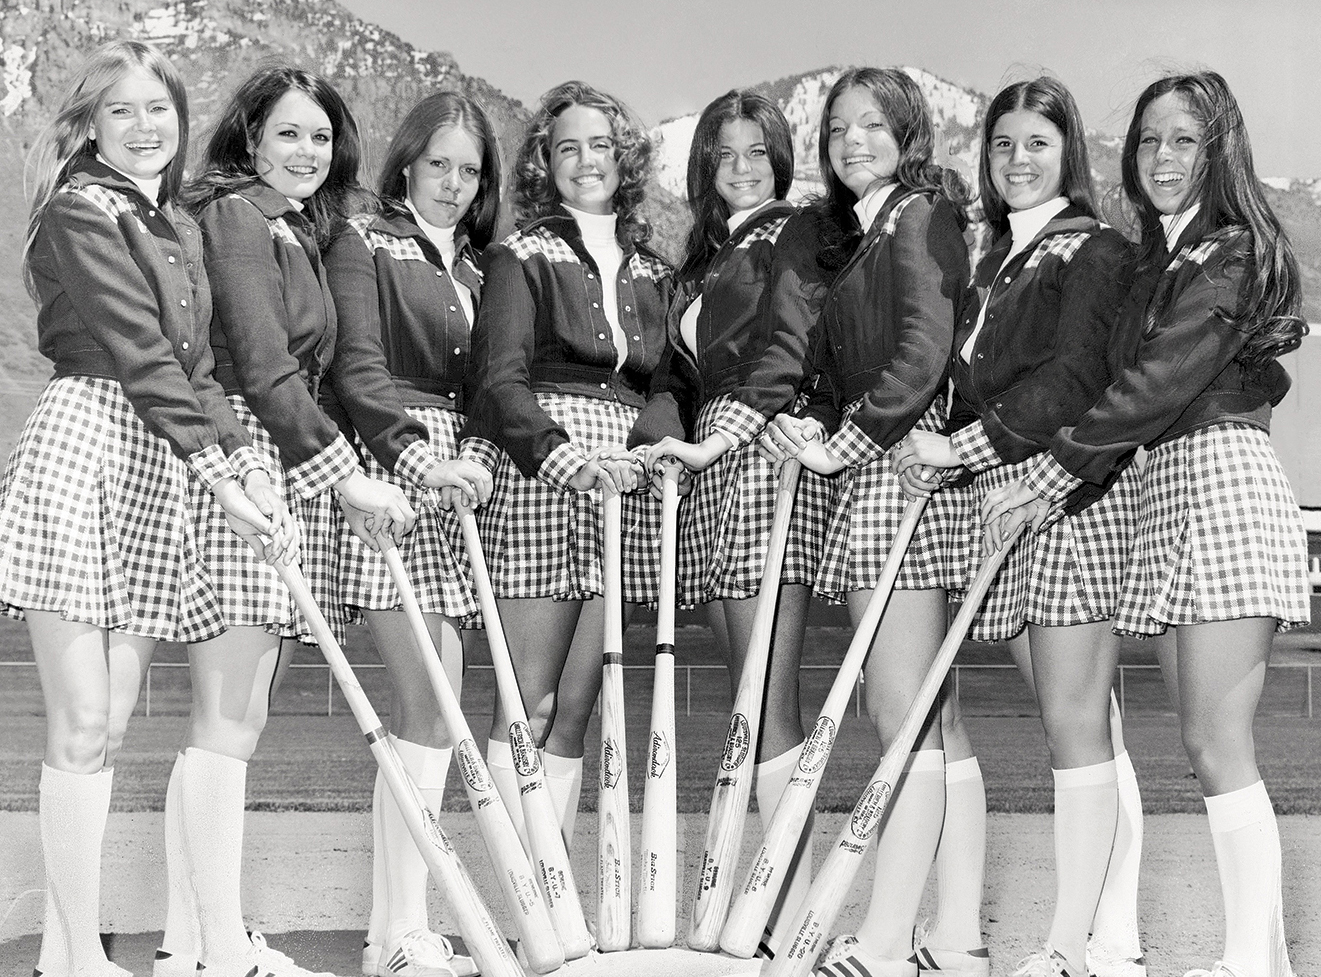 Looking Back: BYU’s Bat Girls and a Debate on the Quad